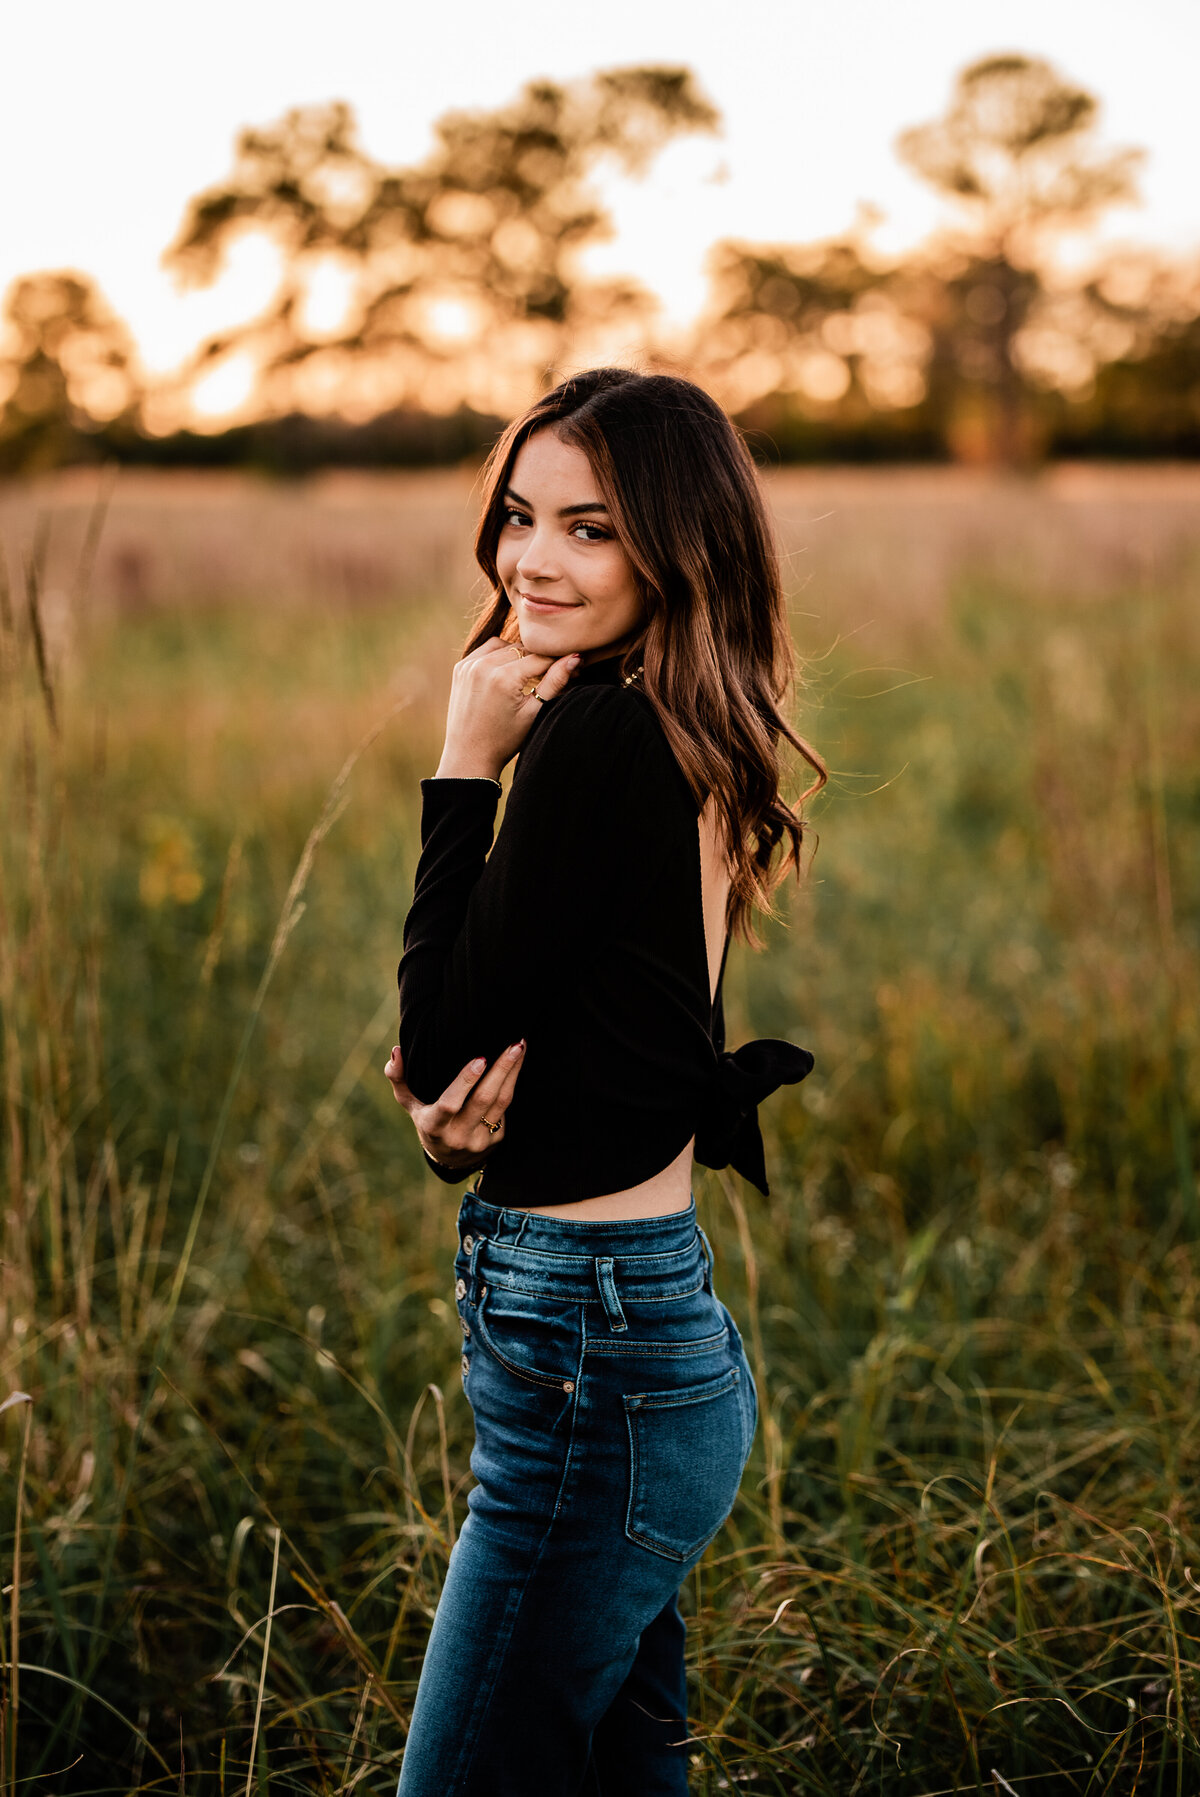 In an open field, a senior looks over her shoulder and smiles at the camera.